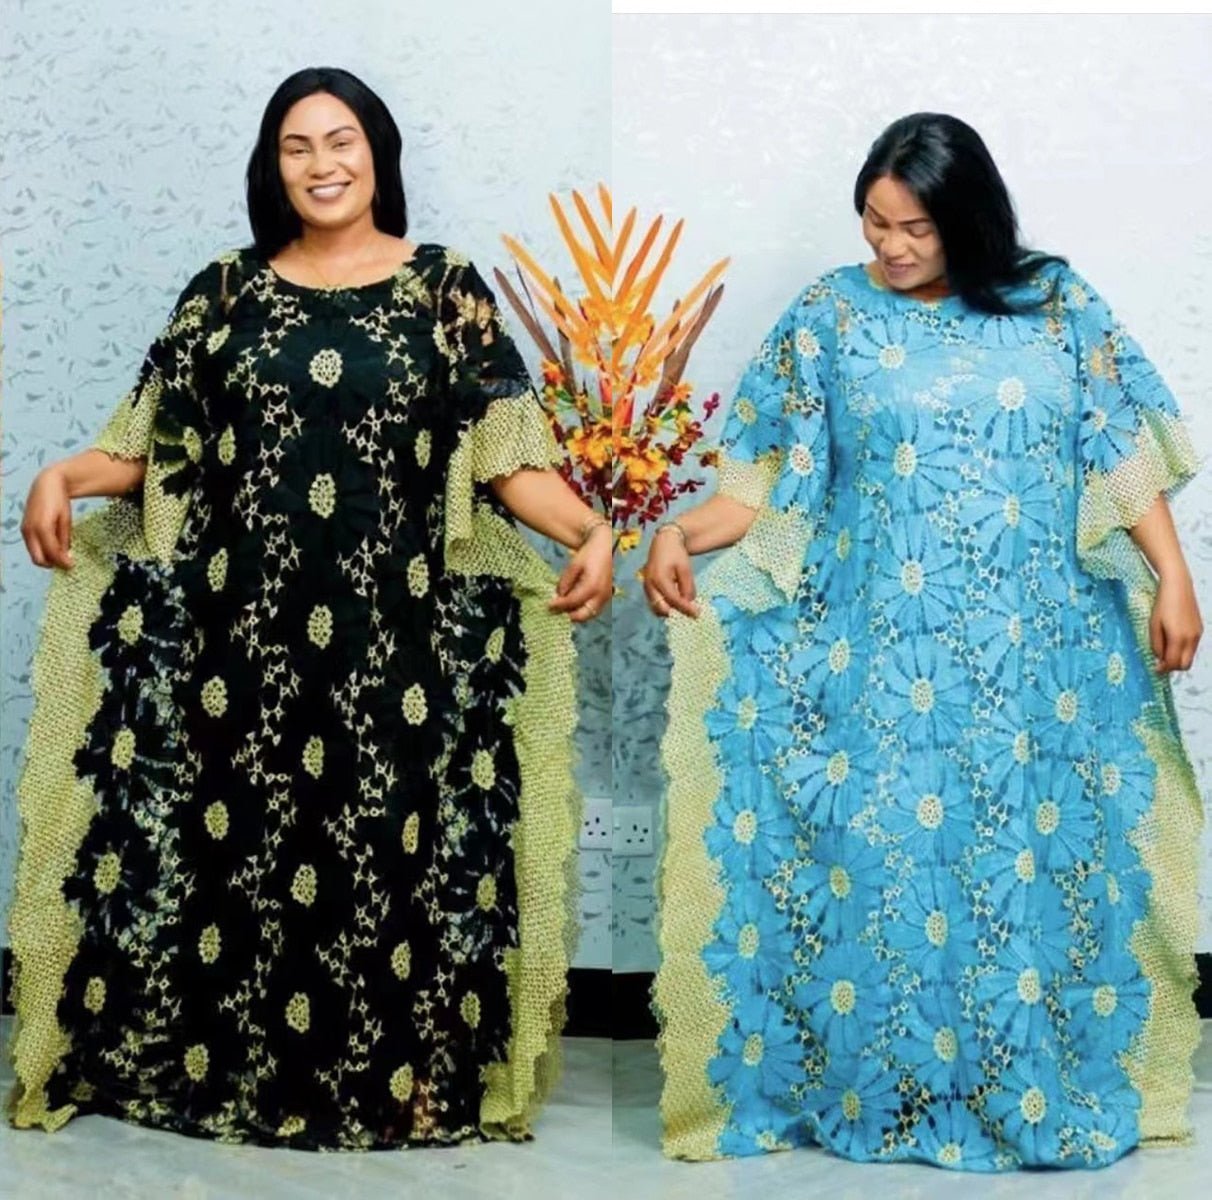 Graceful and Stylish: African Women's Dashiki Abaya Maxi Dress with Inside Skirt - Flexi Africa - Flexi Africa offers Free Delivery Worldwide - Vibrant African traditional clothing showcasing bold prints and intricate designs